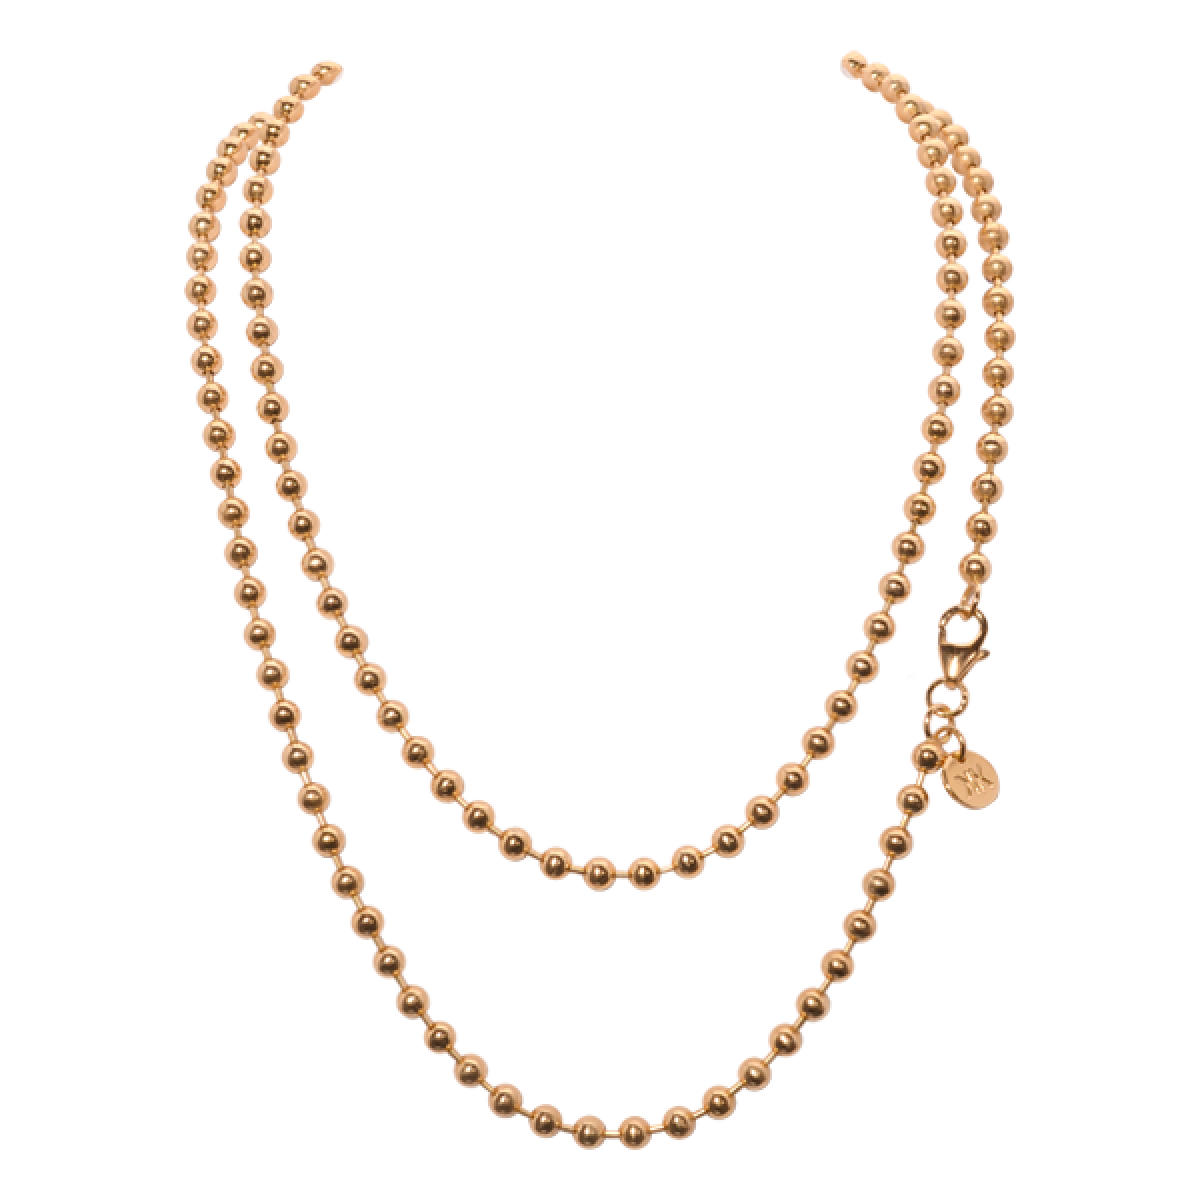 Jewellery Chain Hd PNG Image